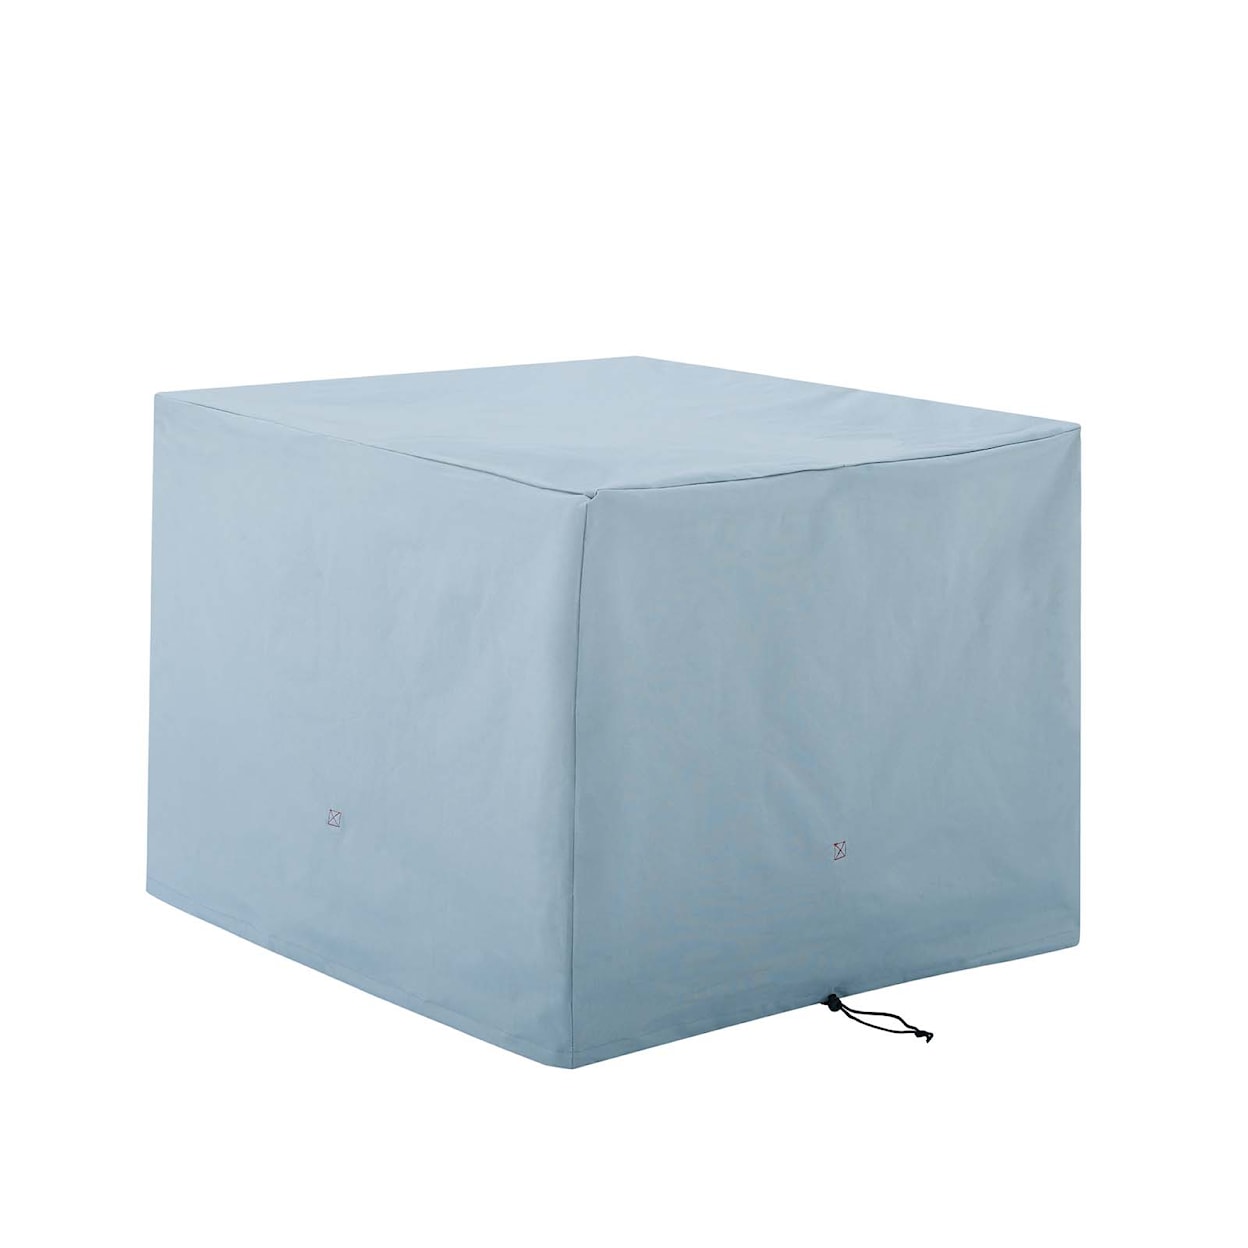 Modway Conway Outdoor Furniture Cover